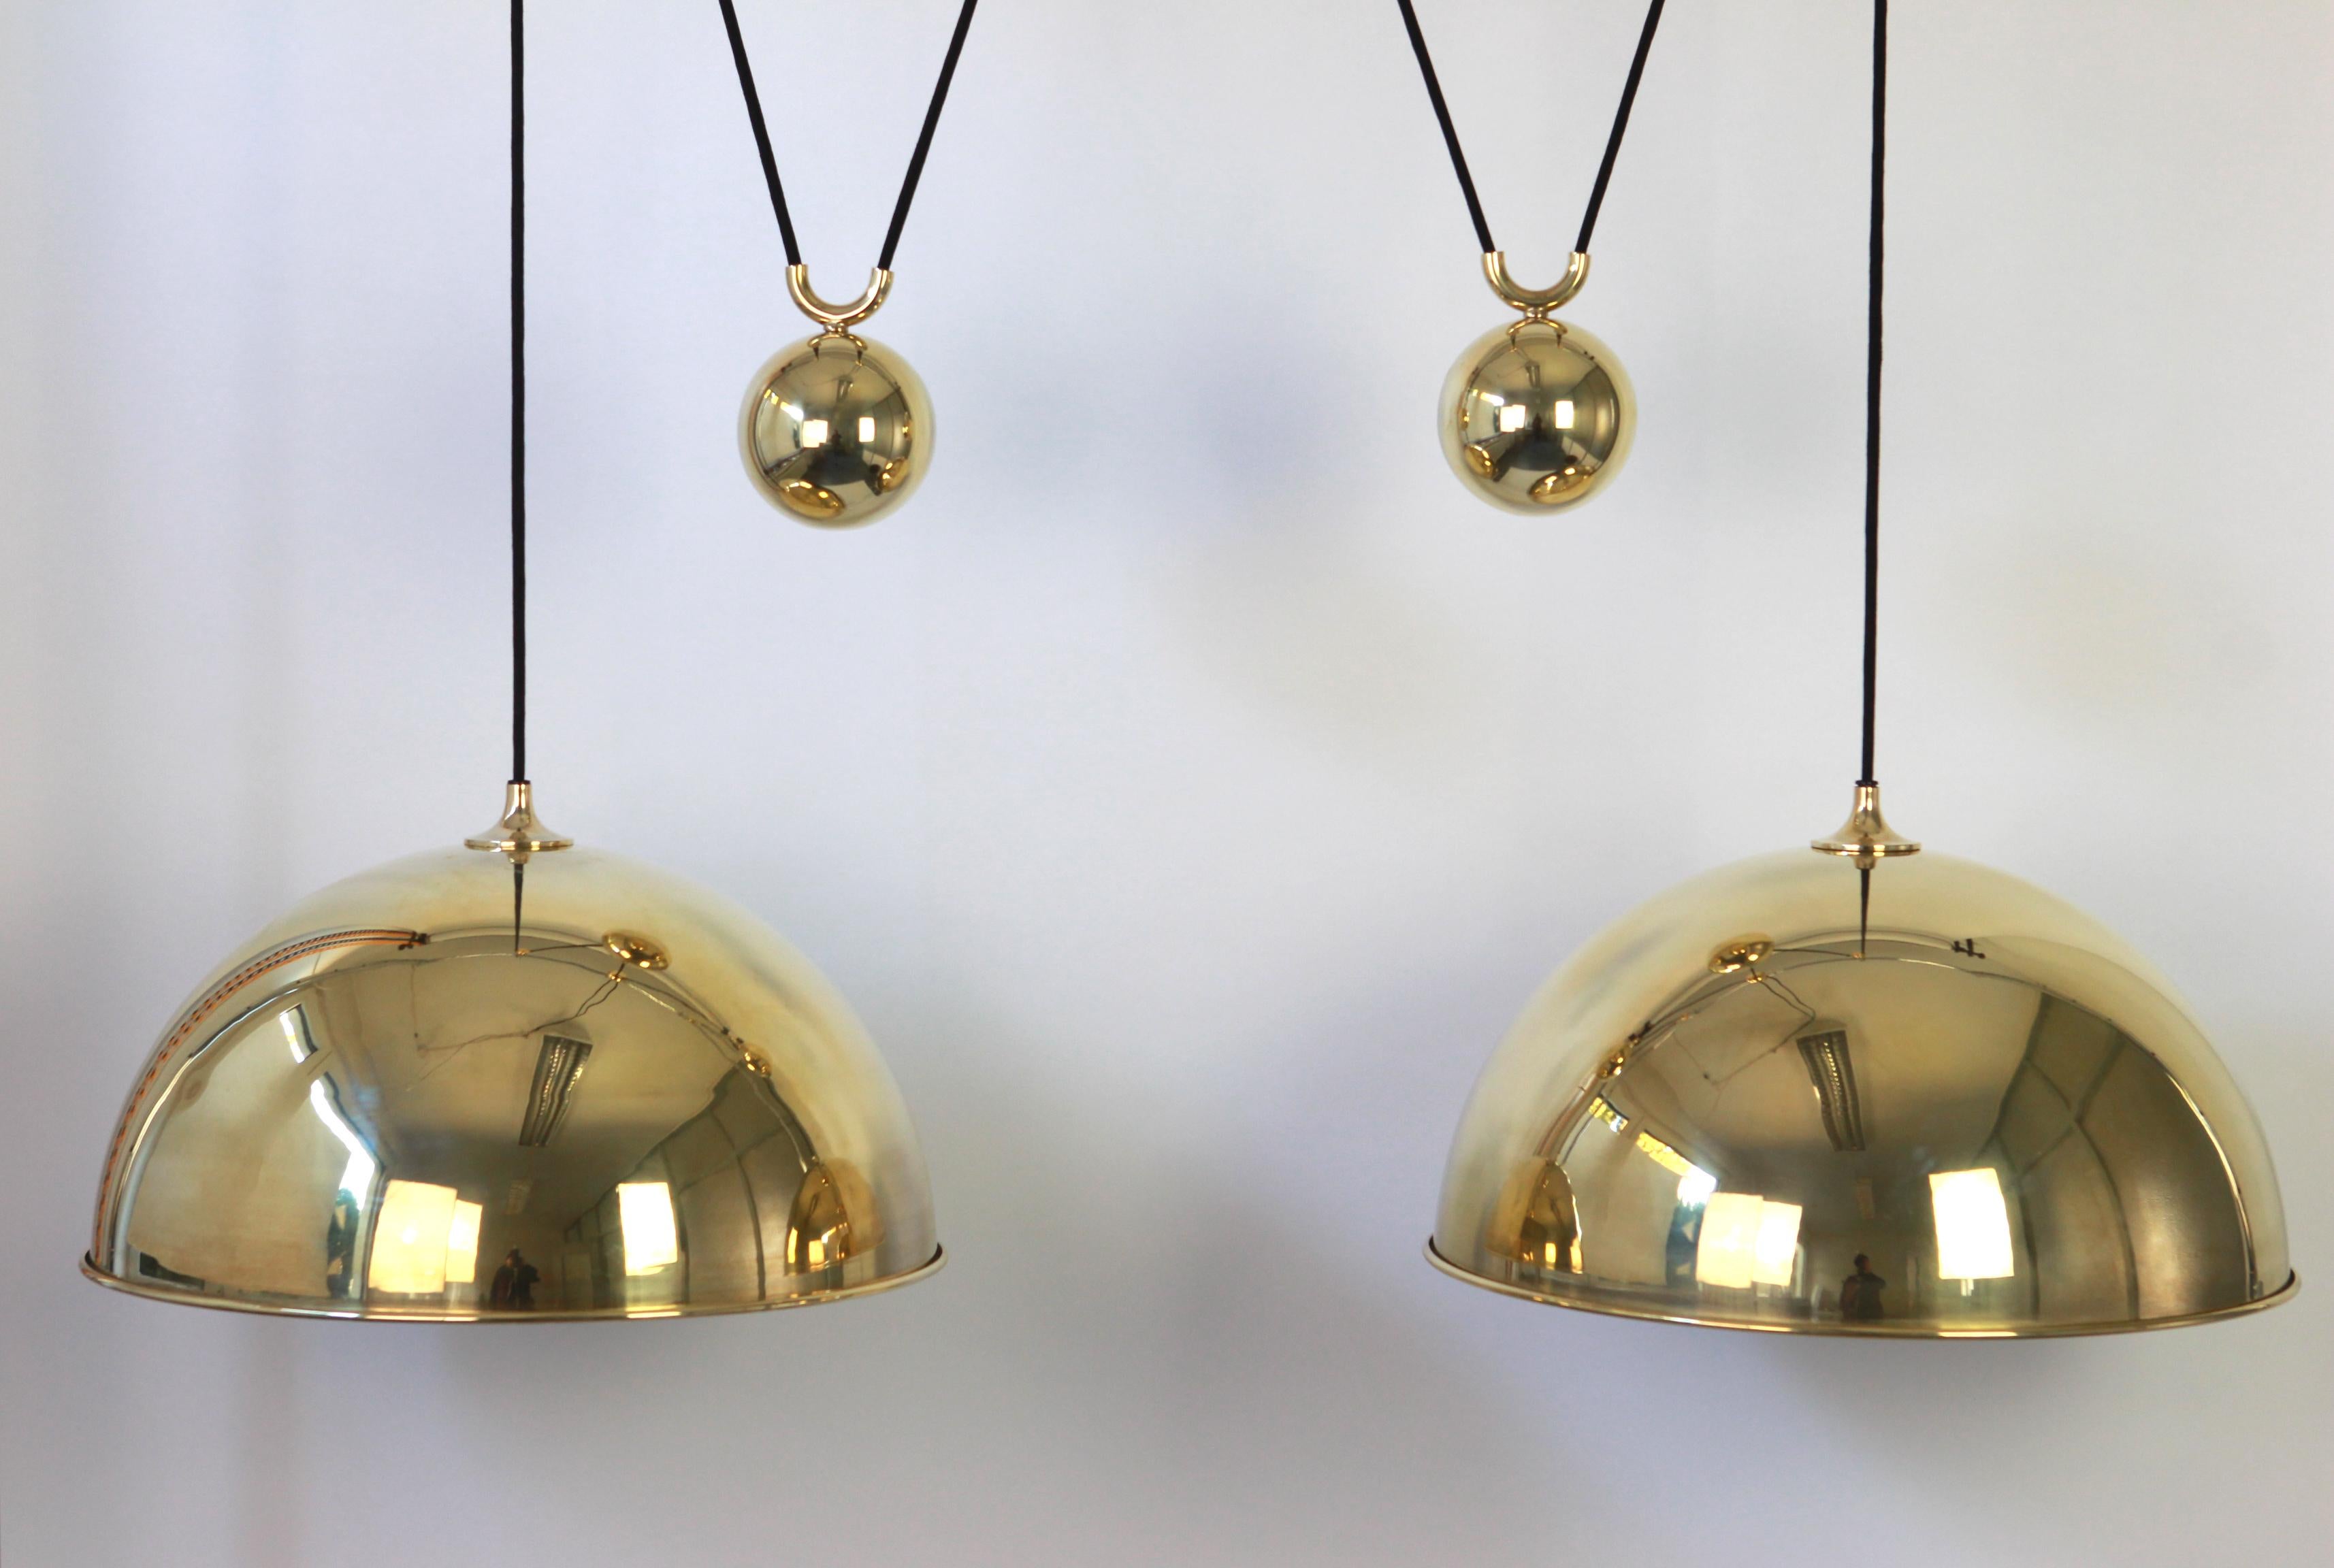 Stunning double Posa brass pendant with adjustable counter weights designed by Florian Schulz, Germany, 1970s

Two heavy metall ball counter-weight and two brass domes. Cloth cord.
Excellent vintage condition. Height is adjustable.
Sockets: 2 x